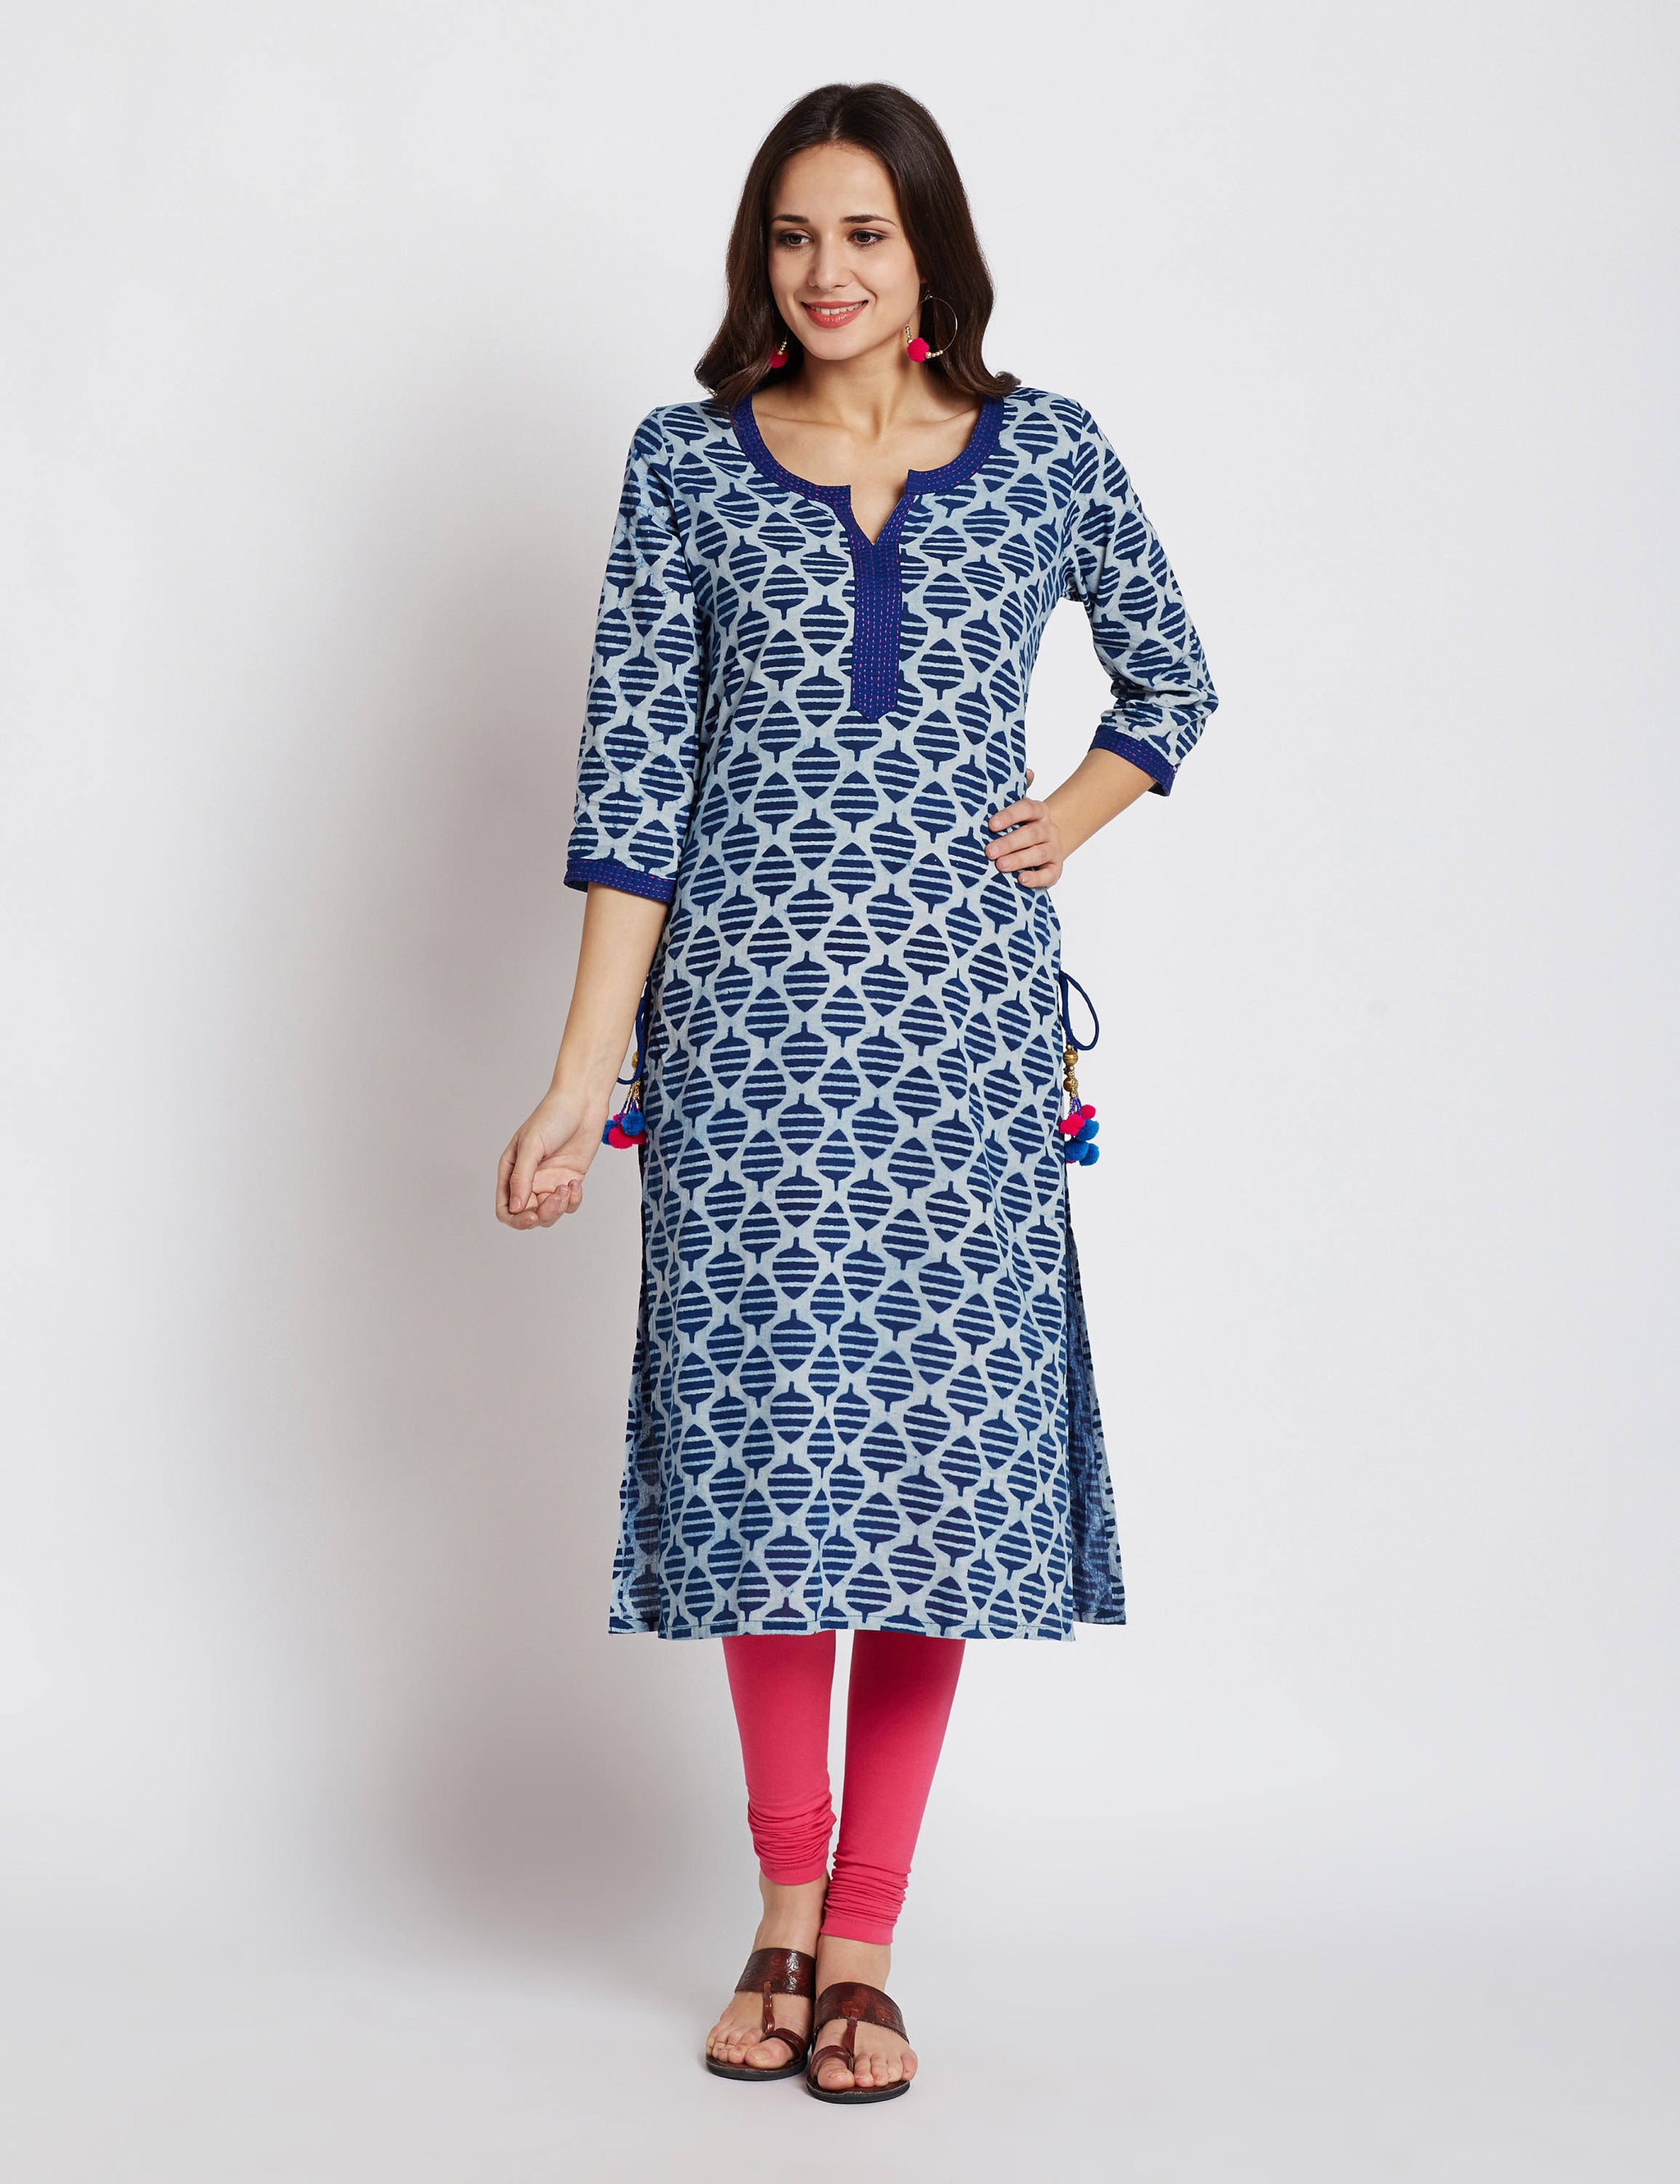 Kurti Pattern PNG Images For Free Download - Pngtree